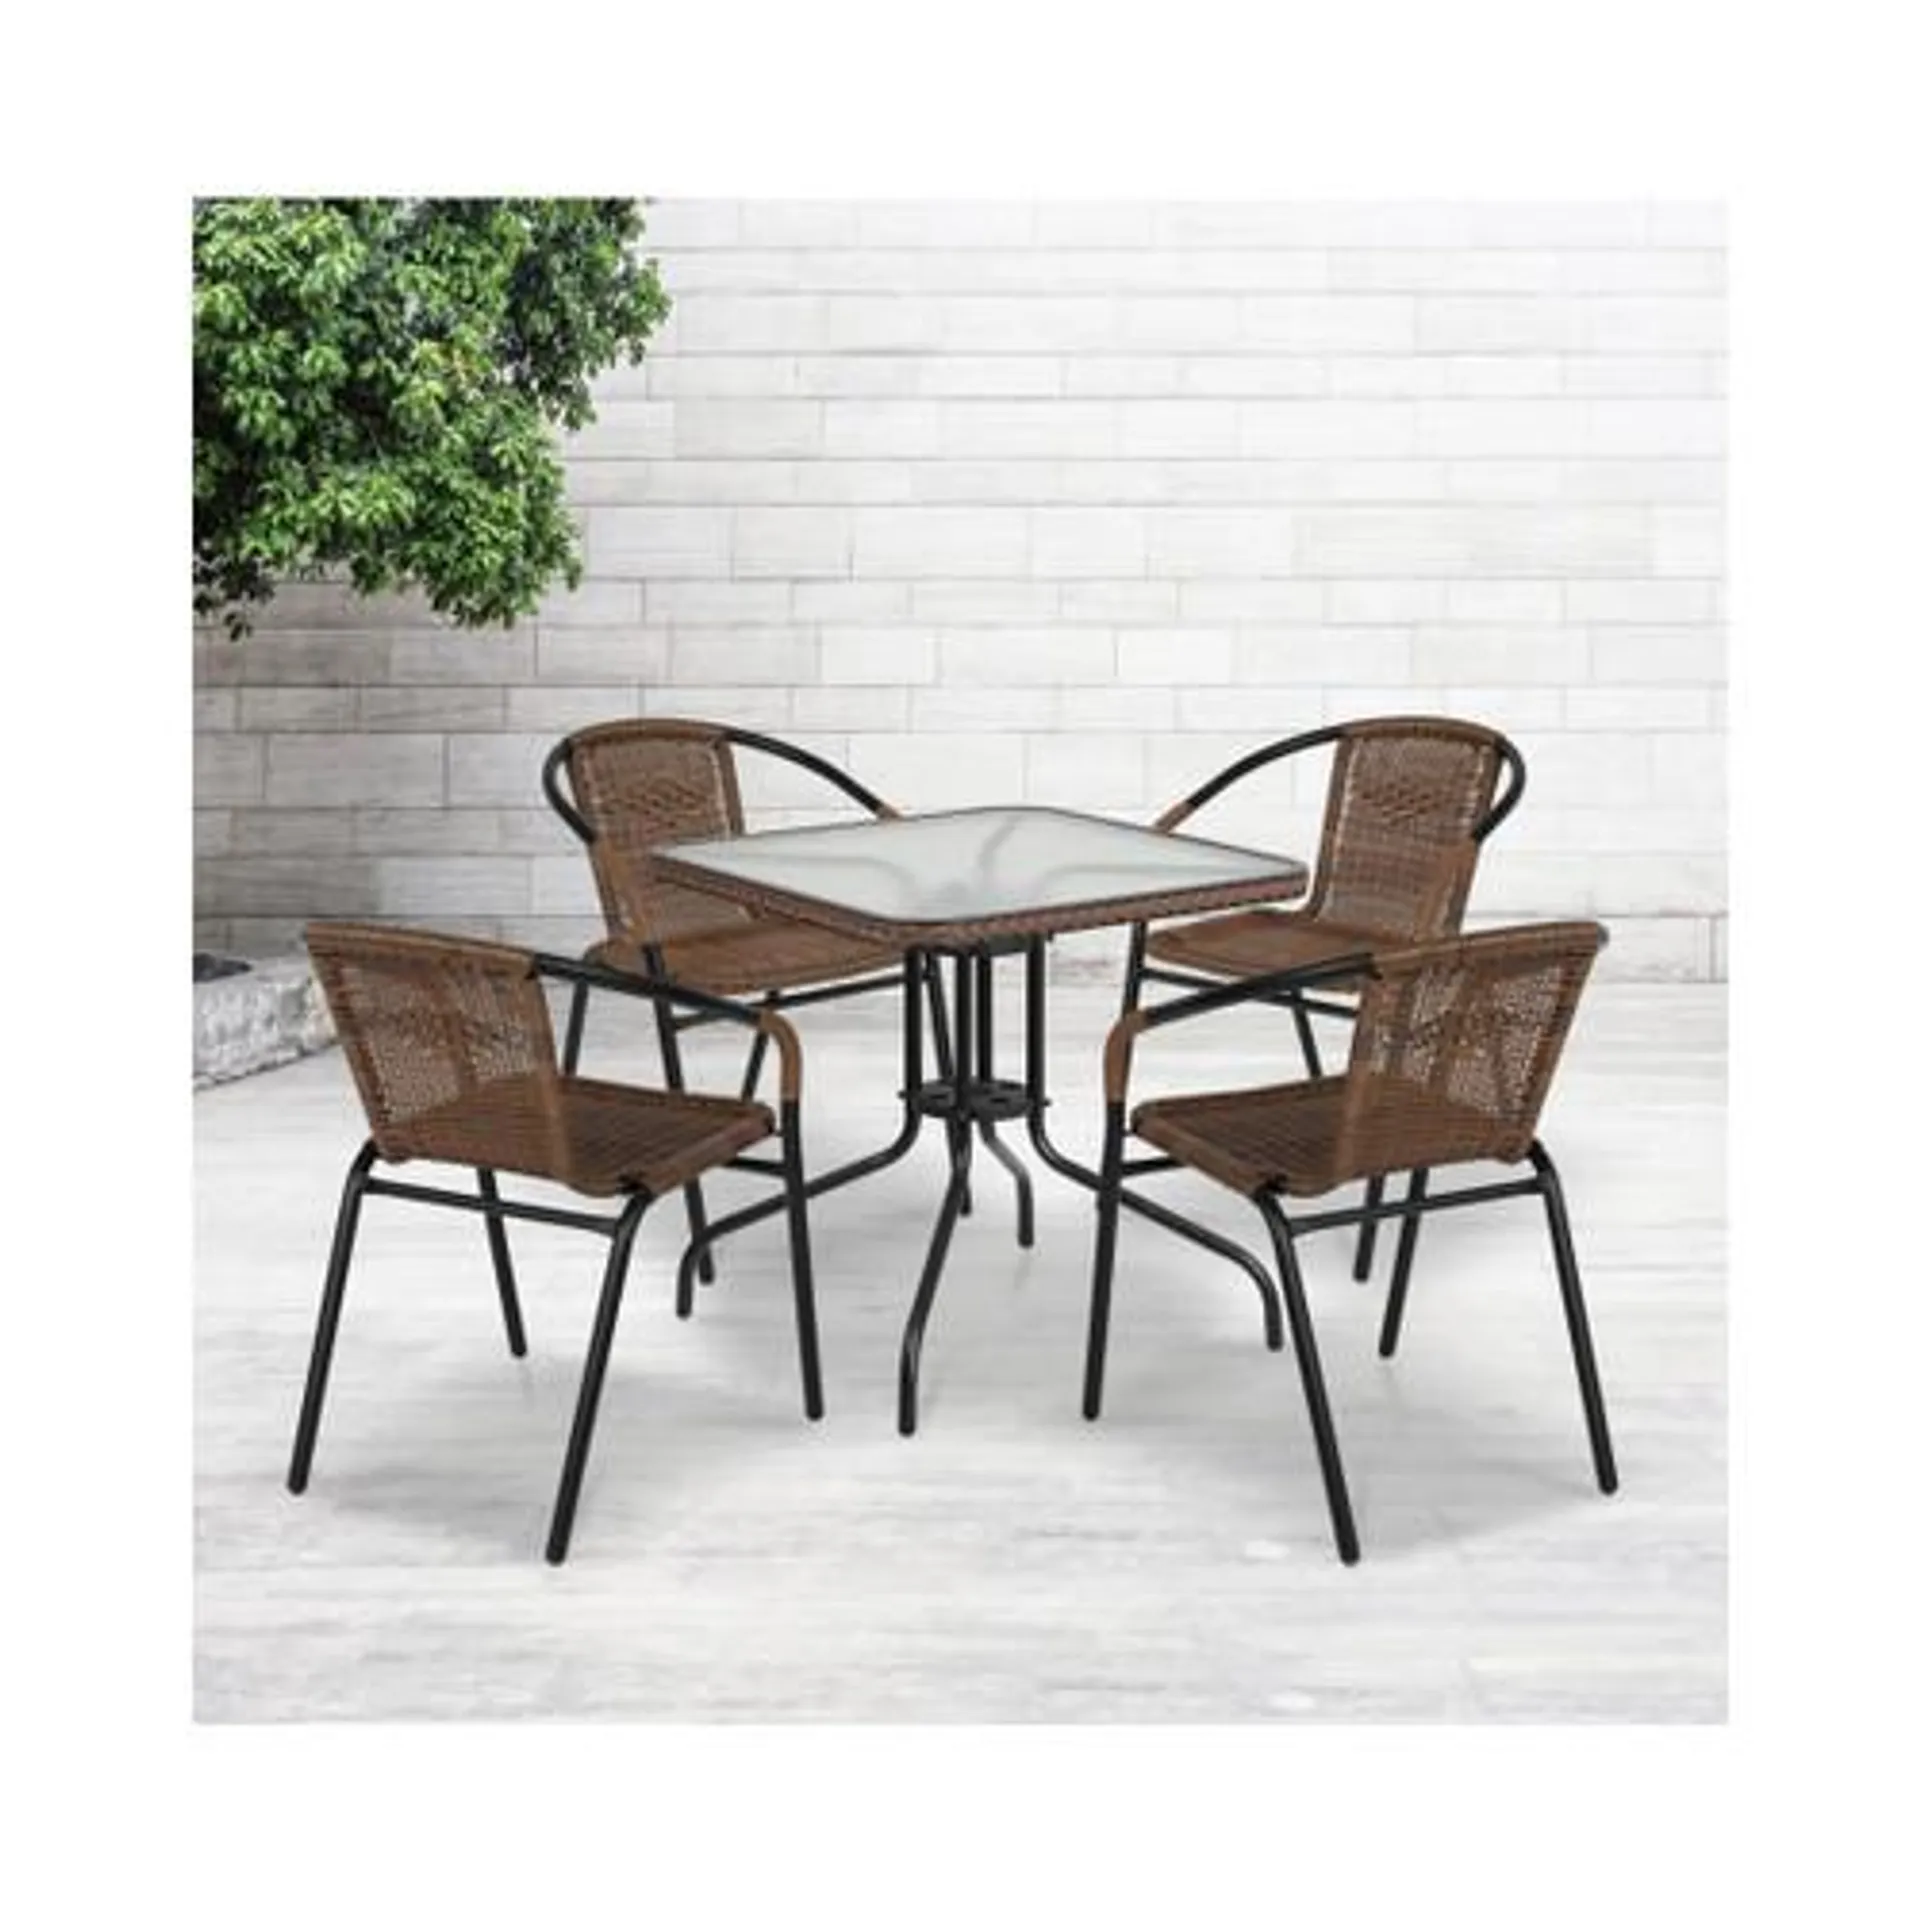 28” Square Glass Metal Table with Dark Brown Rattan Edging and 4 Dark Brown Rattan Stack Chairs